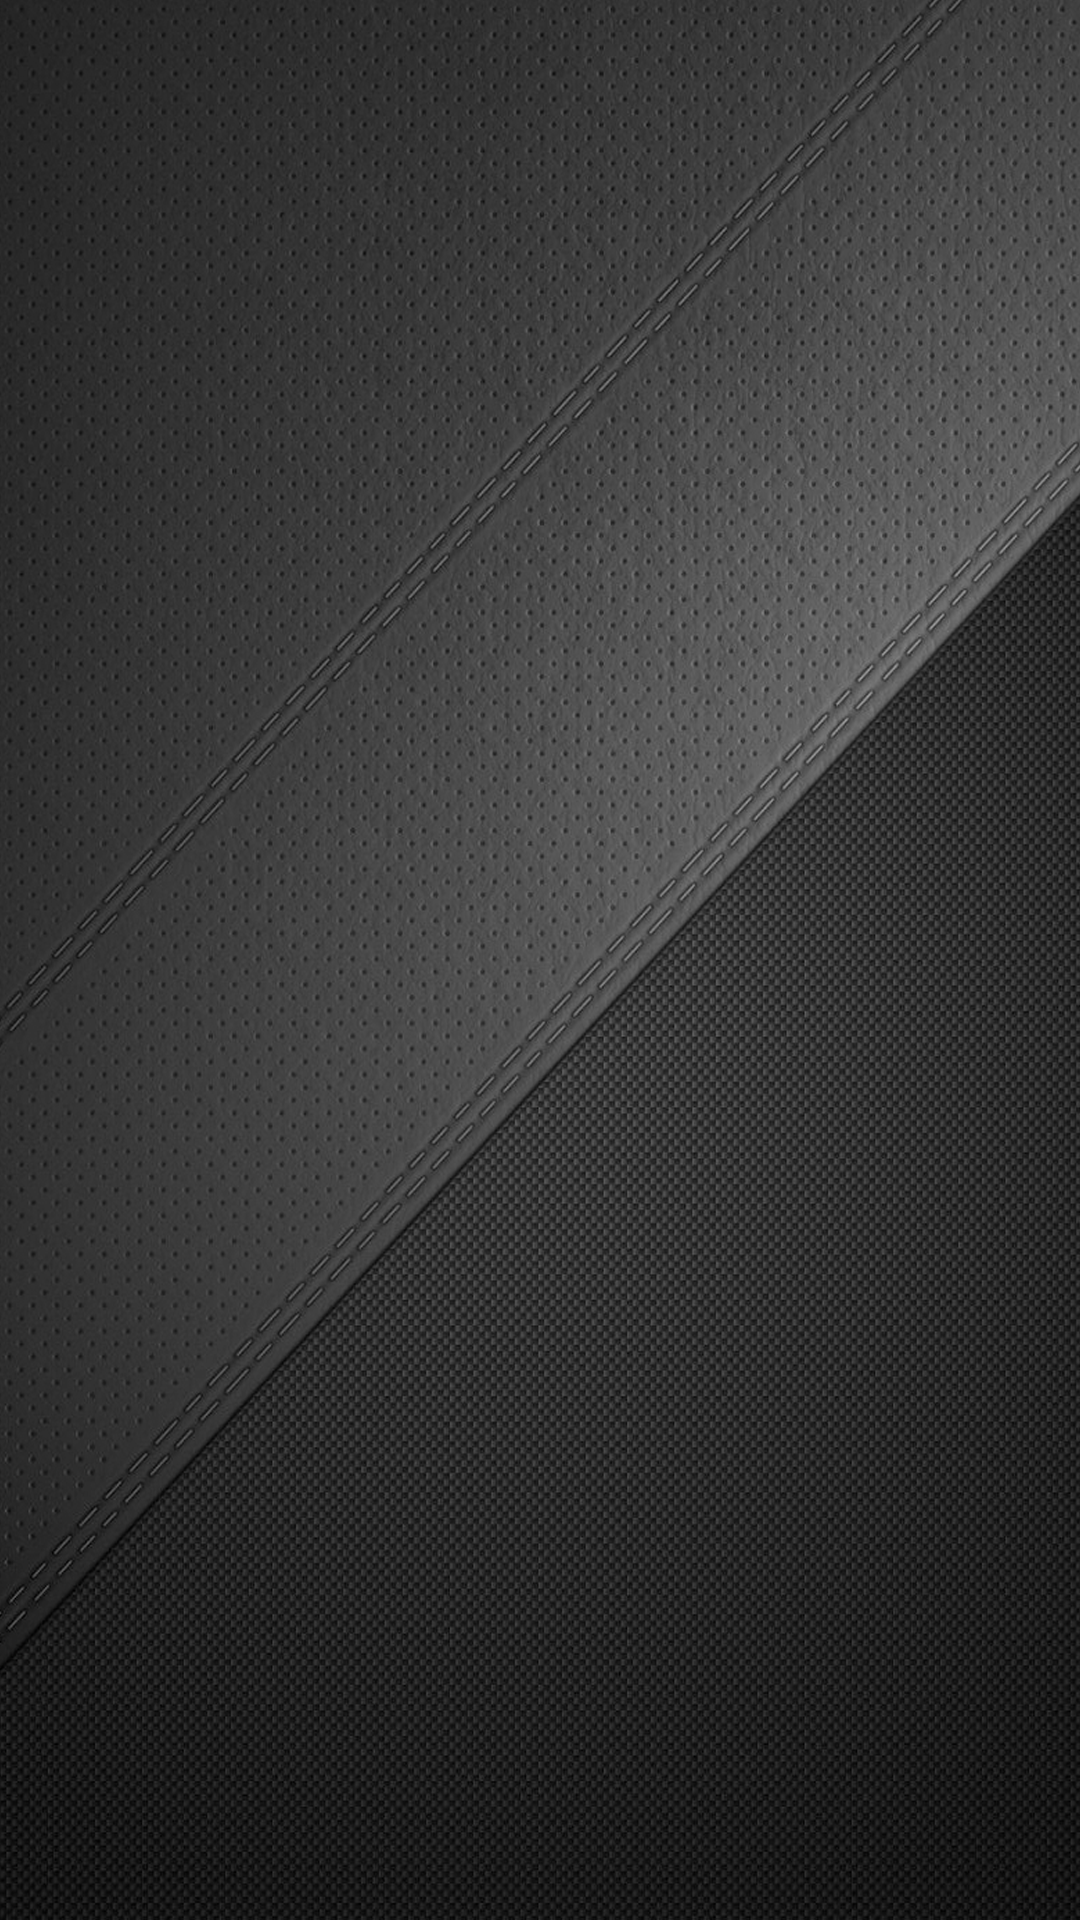 Perforated Leather Texture Dark Android Wallpapers - HD Wallpaper 